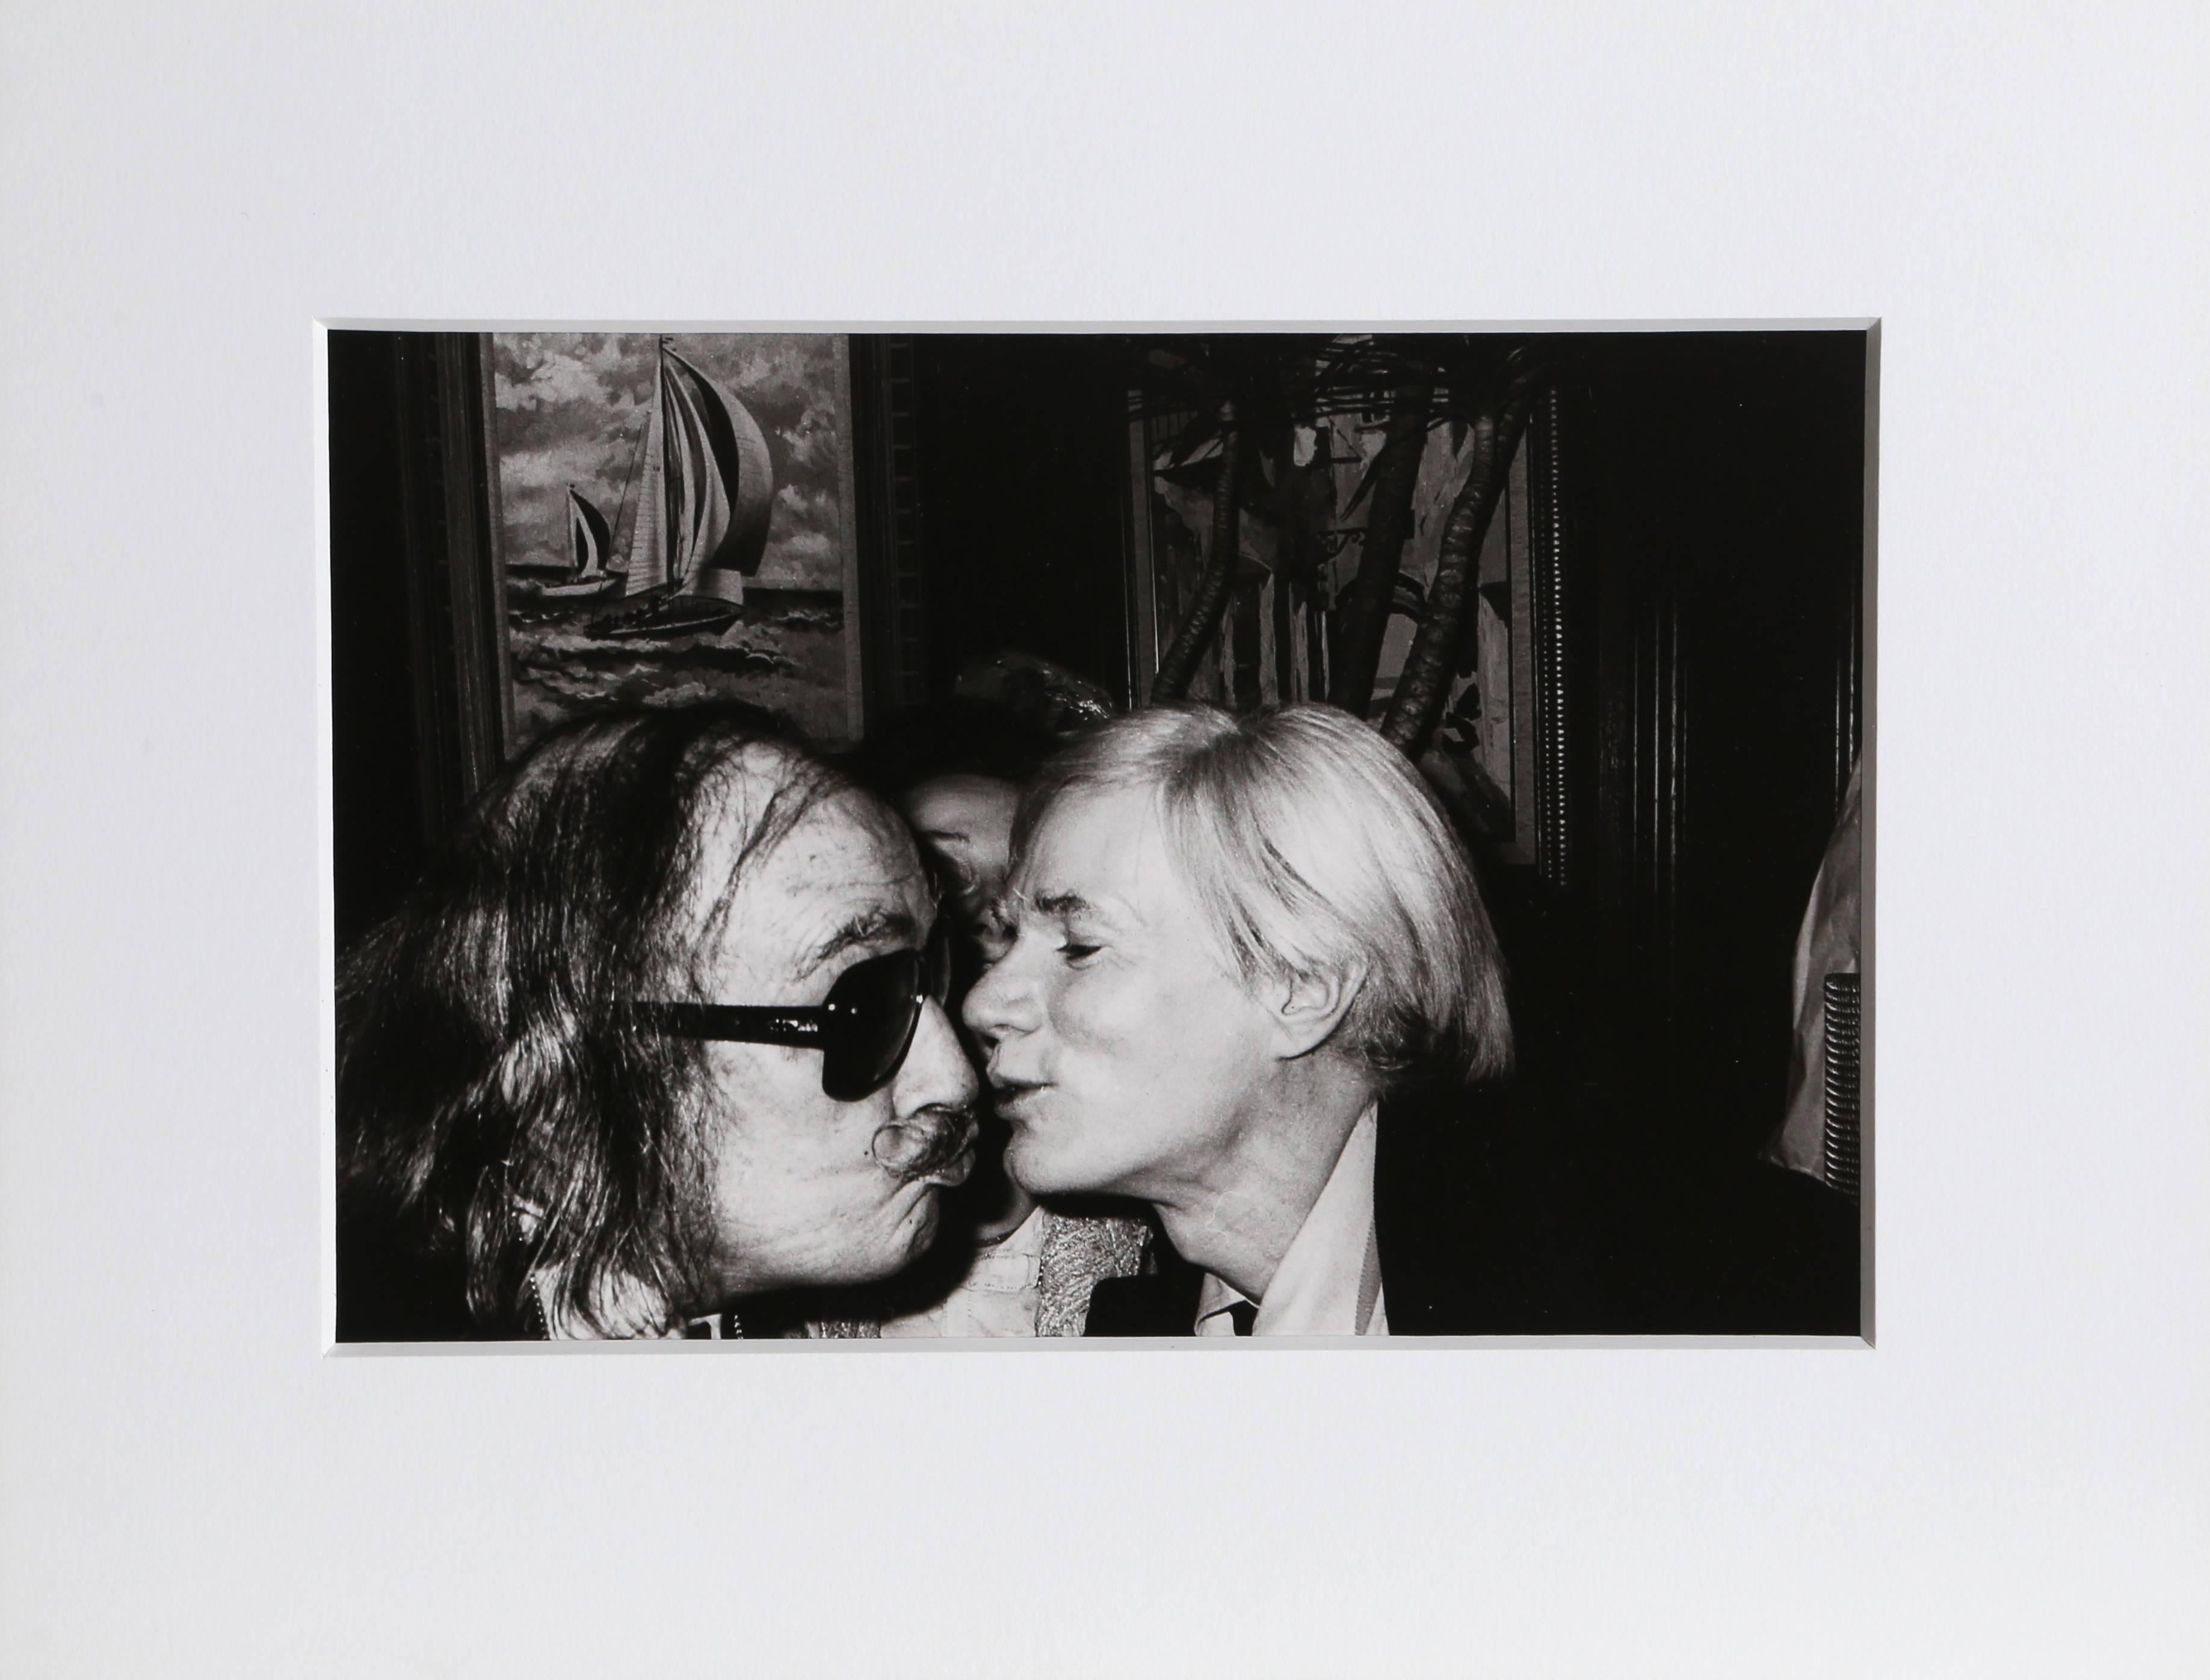 This gelatin silver print was created by American photographer Christopher Makos. Makos is well known for his relationships with icons like Andy Warhol, Tennessee Williams, and John Lennon. Later in life, Warhol called Makos the most modern